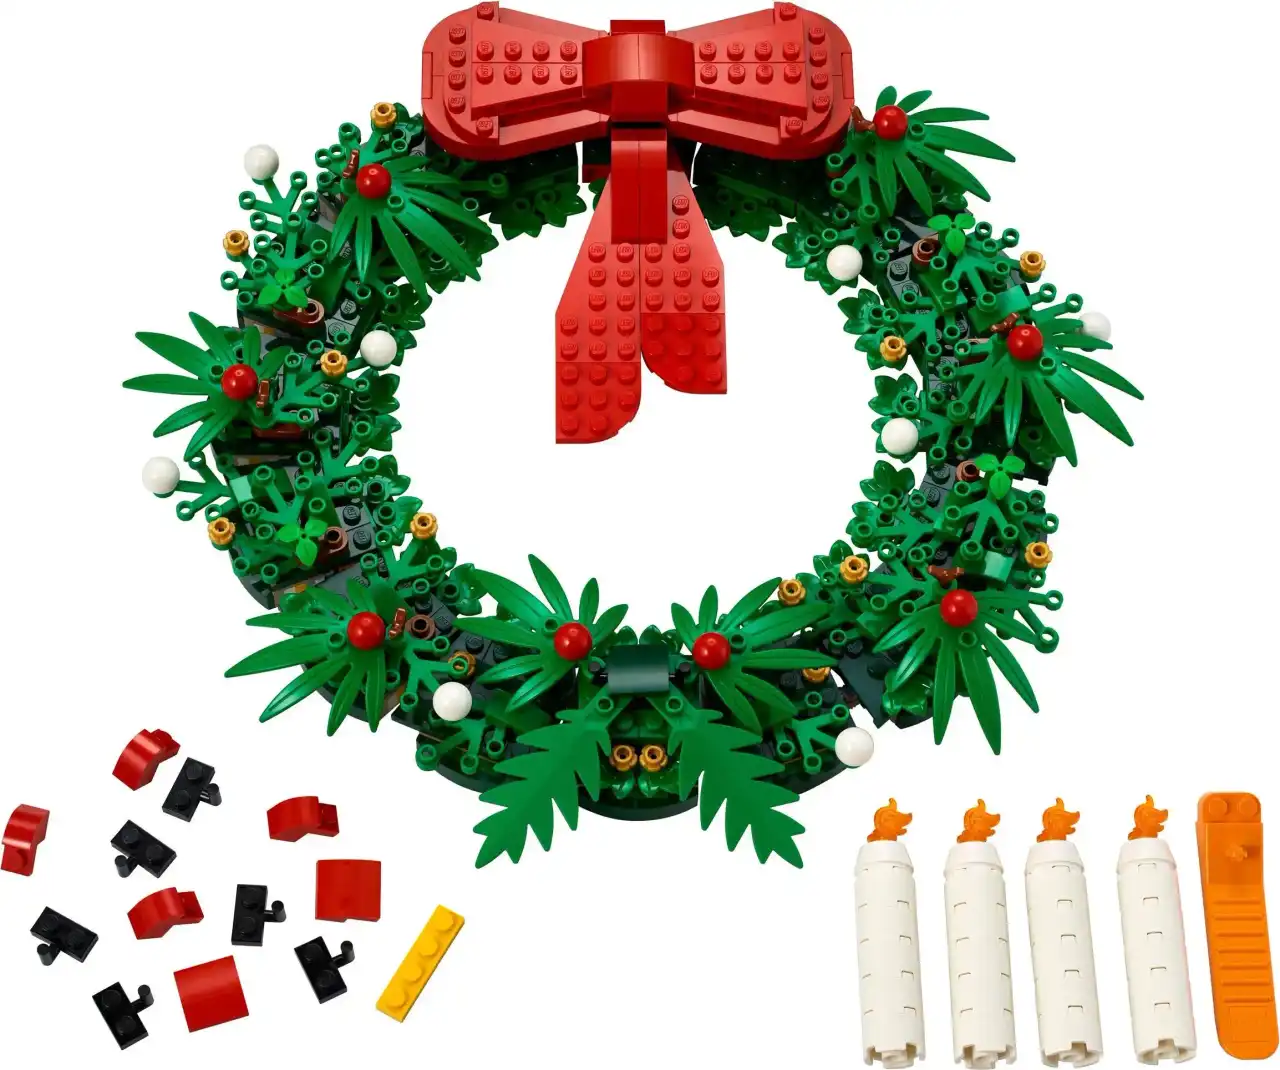 40426 - Christmas Wreath 2-in-1